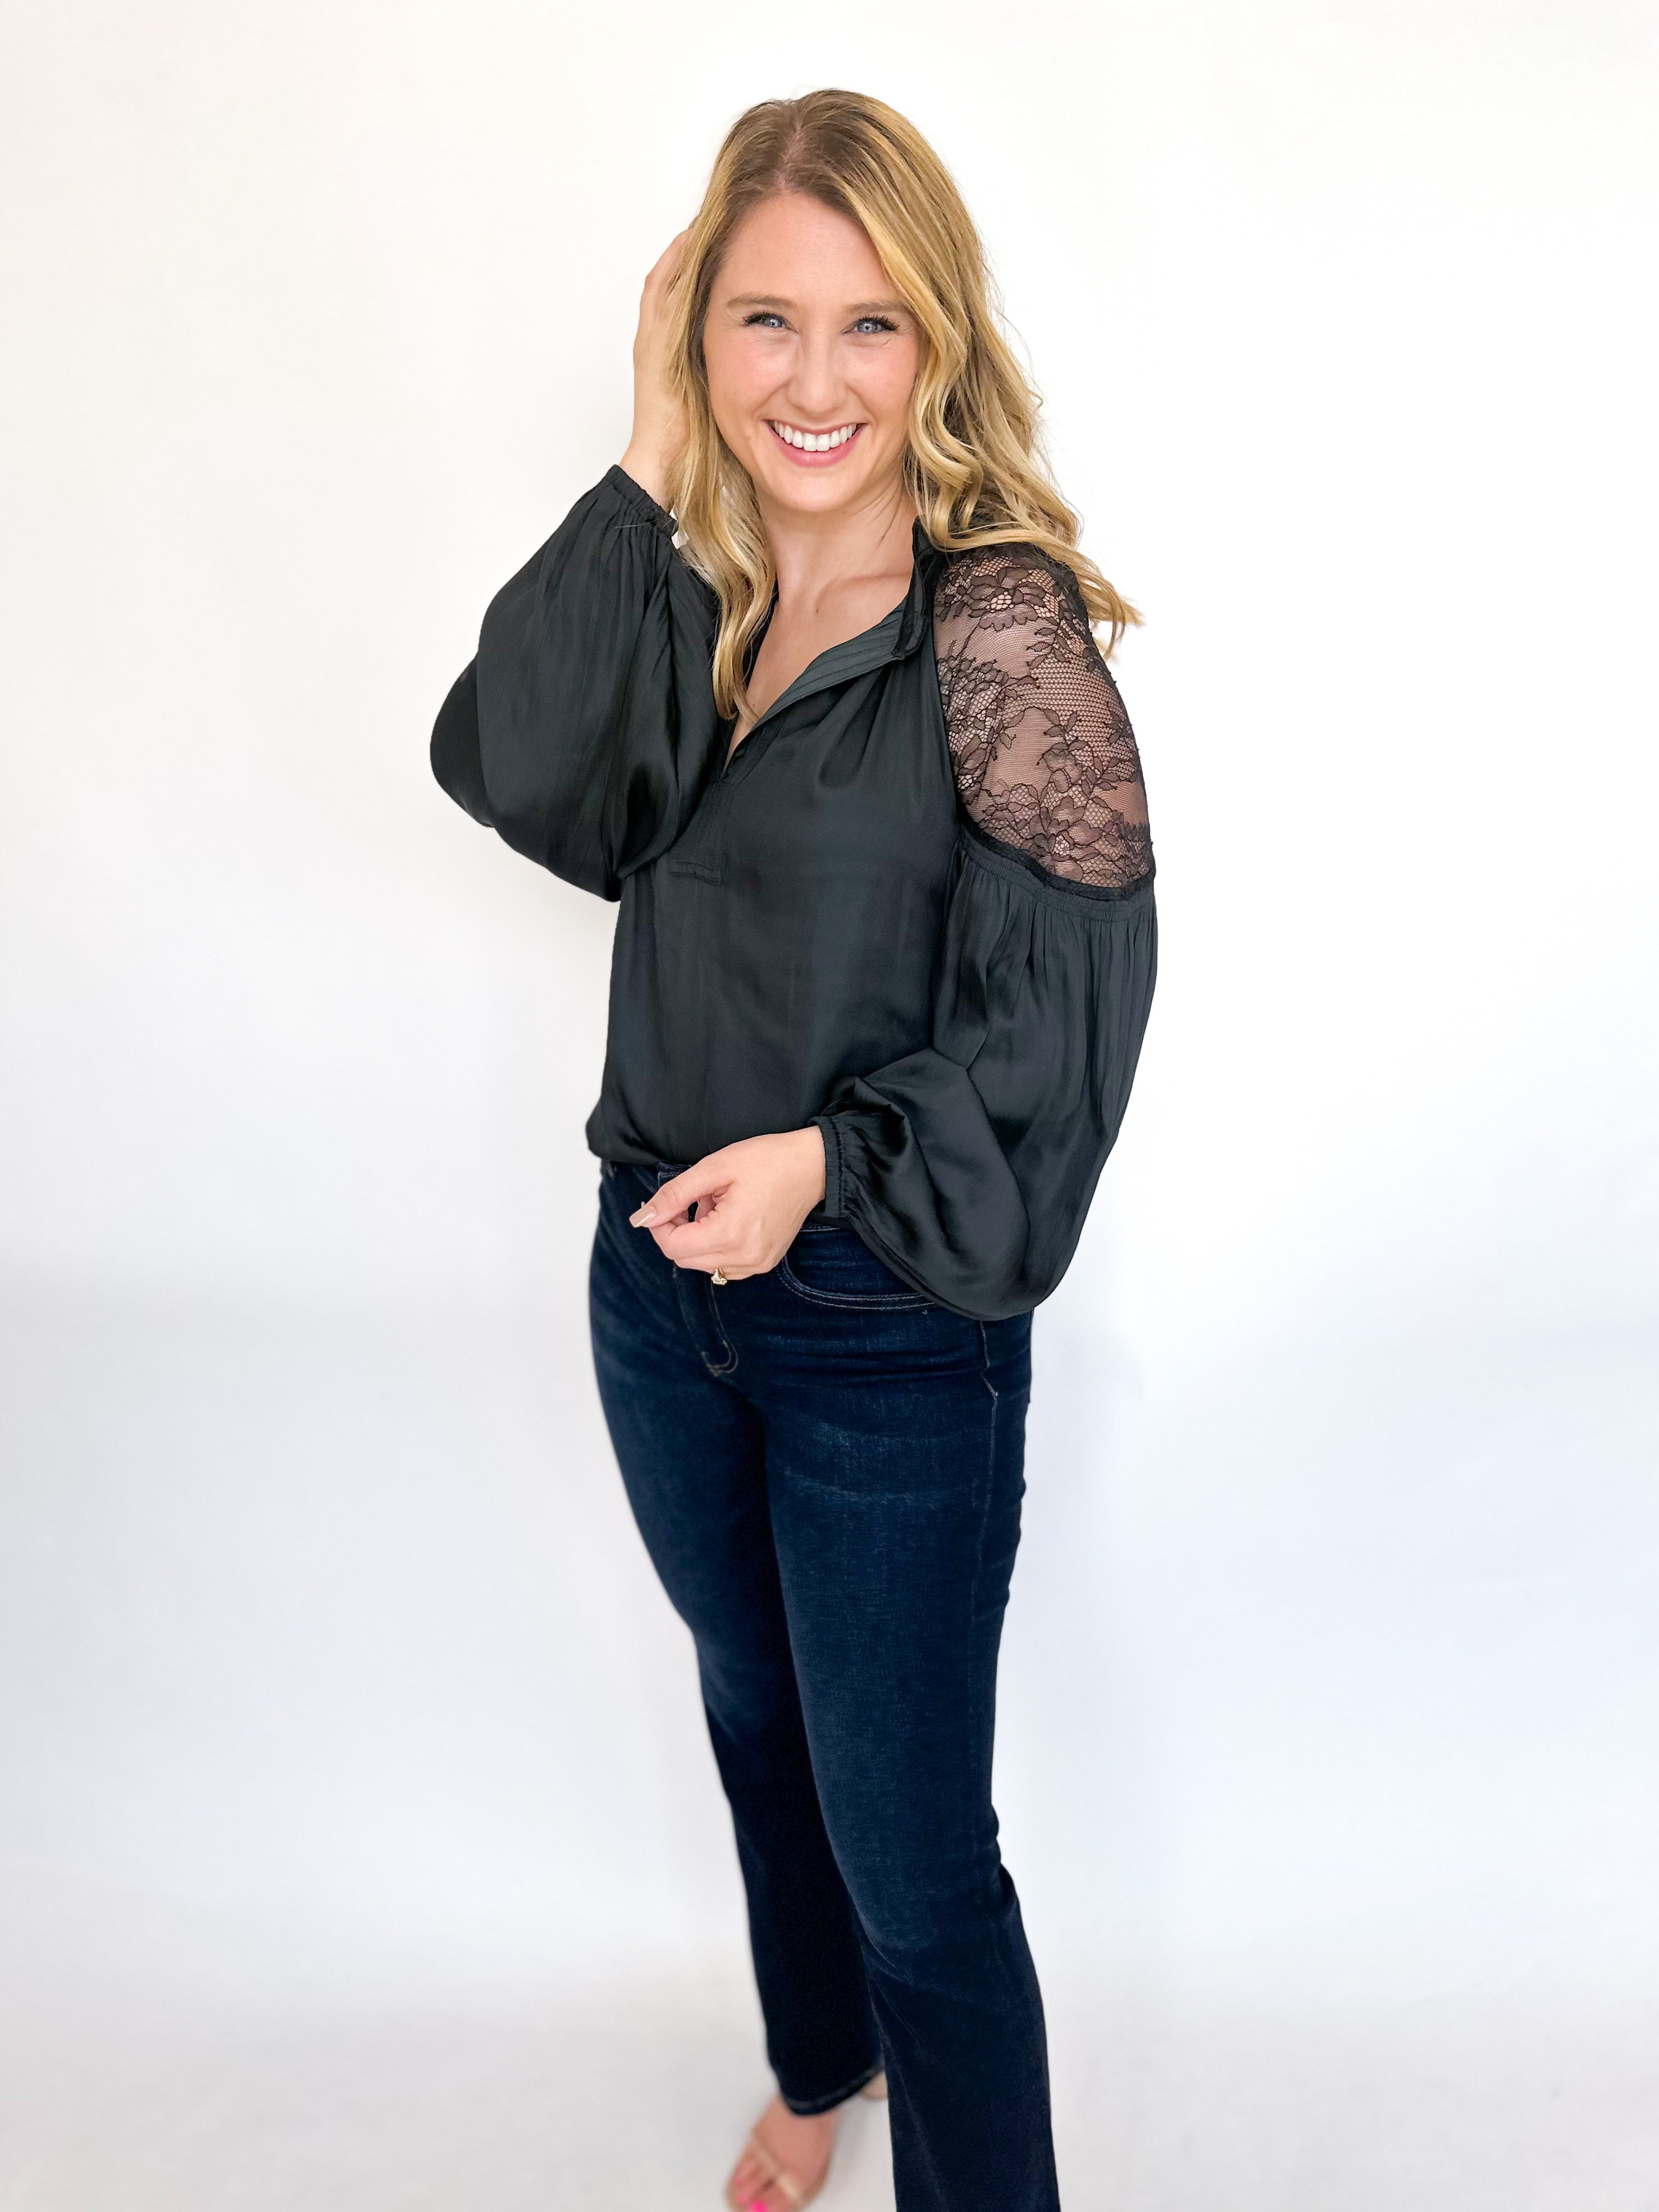 Lace Shoulder Blouse- Black-200 Fashion Blouses-CURRENT AIR CLOTHING-July & June Women's Fashion Boutique Located in San Antonio, Texas